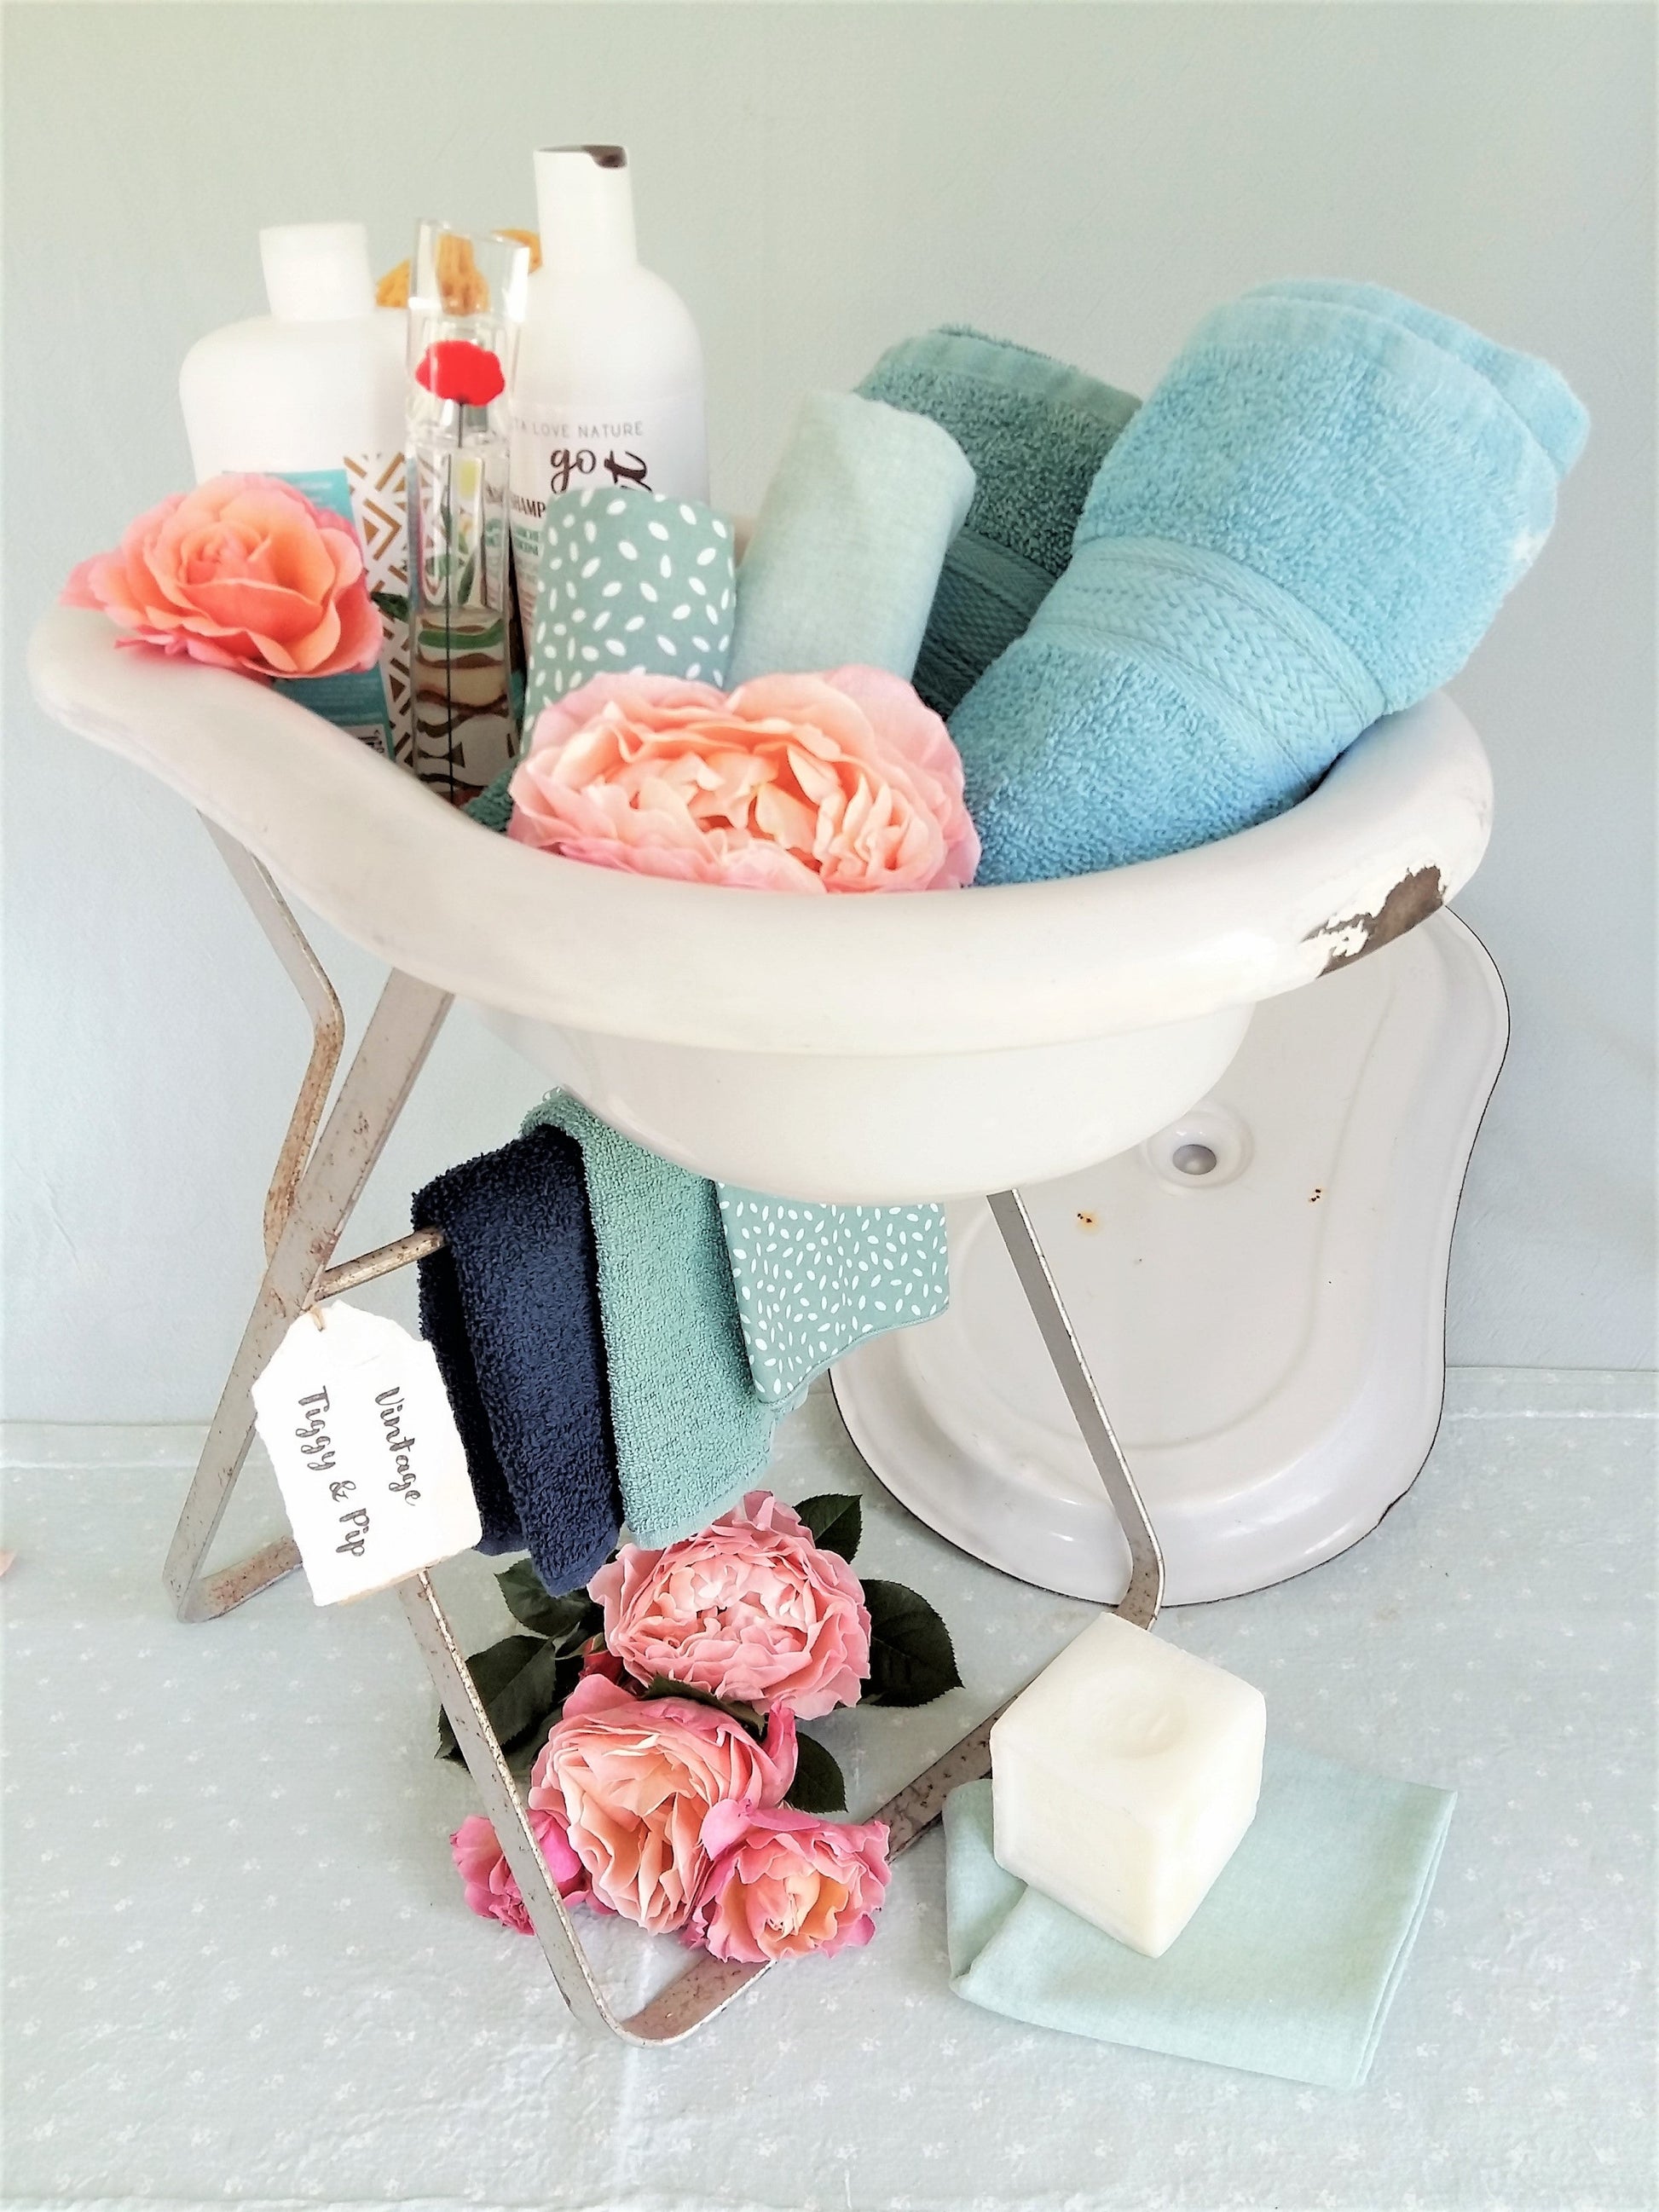 Enamel Baby Bath Tub with Lid, on Stand. from Tiggy & Pip - €260.00! Shop now at Tiggy and Pip